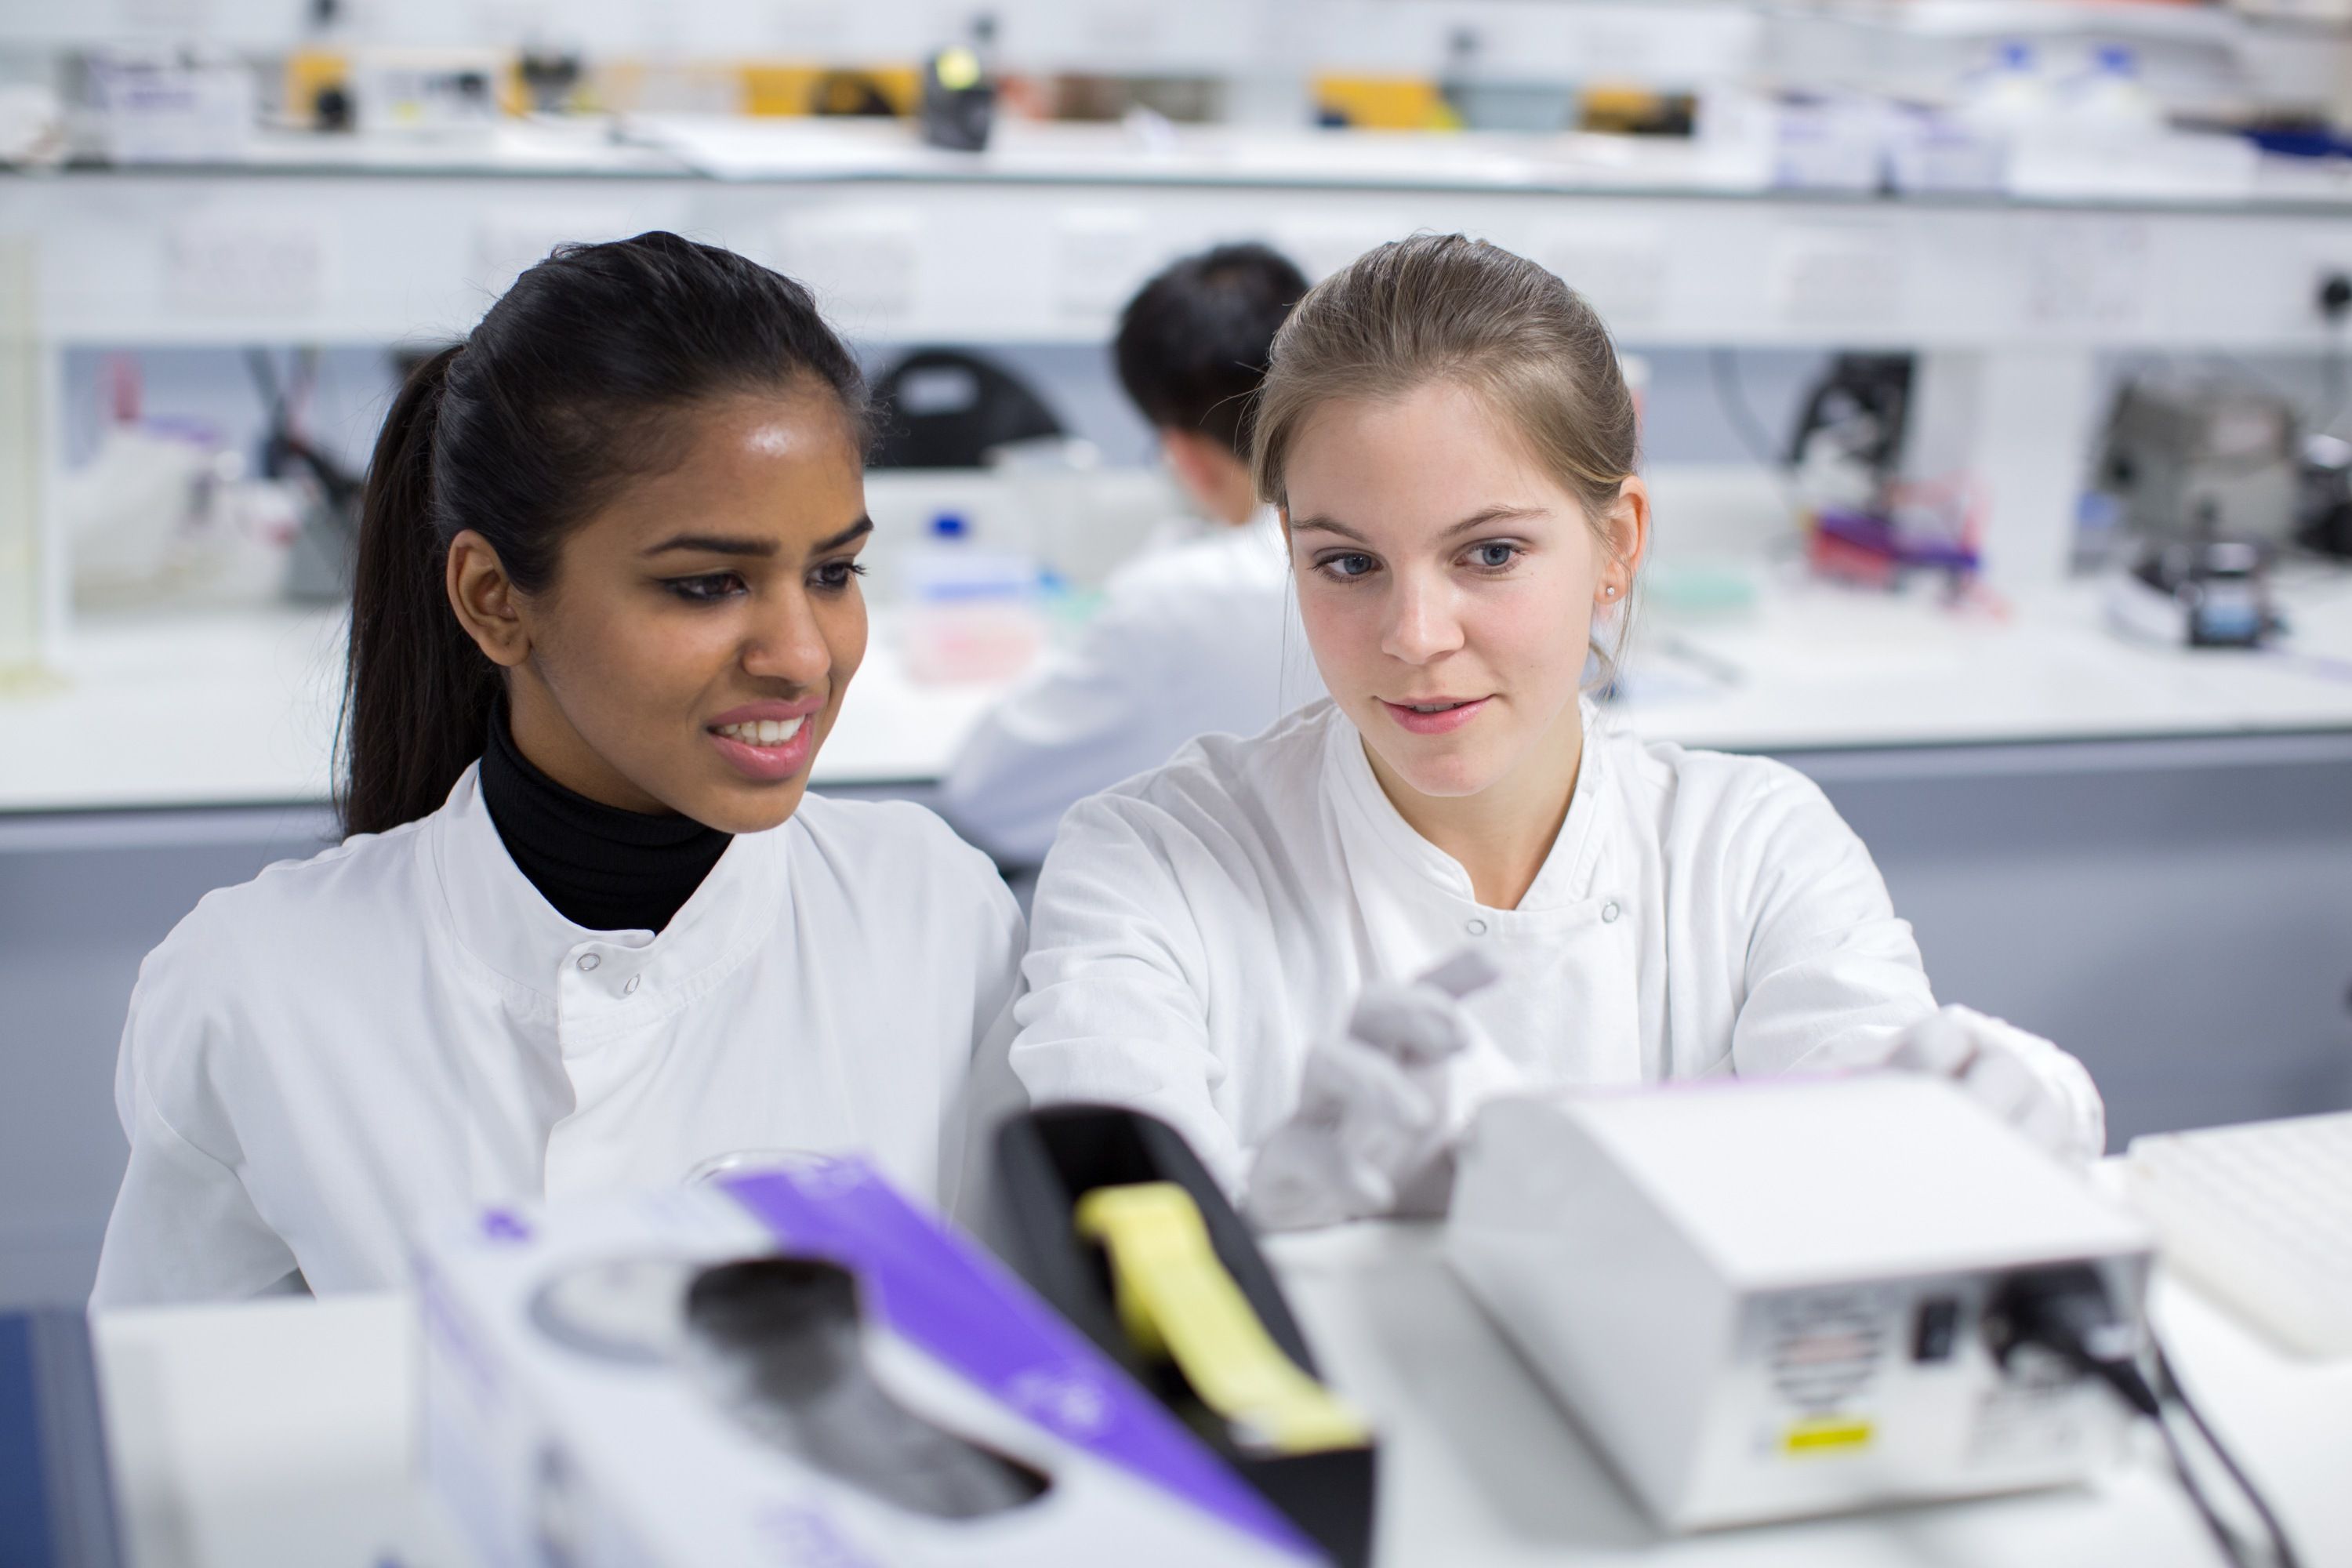 Students on the MSc in Human Molecular Genetics are shown here in the Meghraj Teaching Laboratory at Imperial’s Hammersmith Campus. During their four-week placement in the Laboratory, students learn the practical skills the